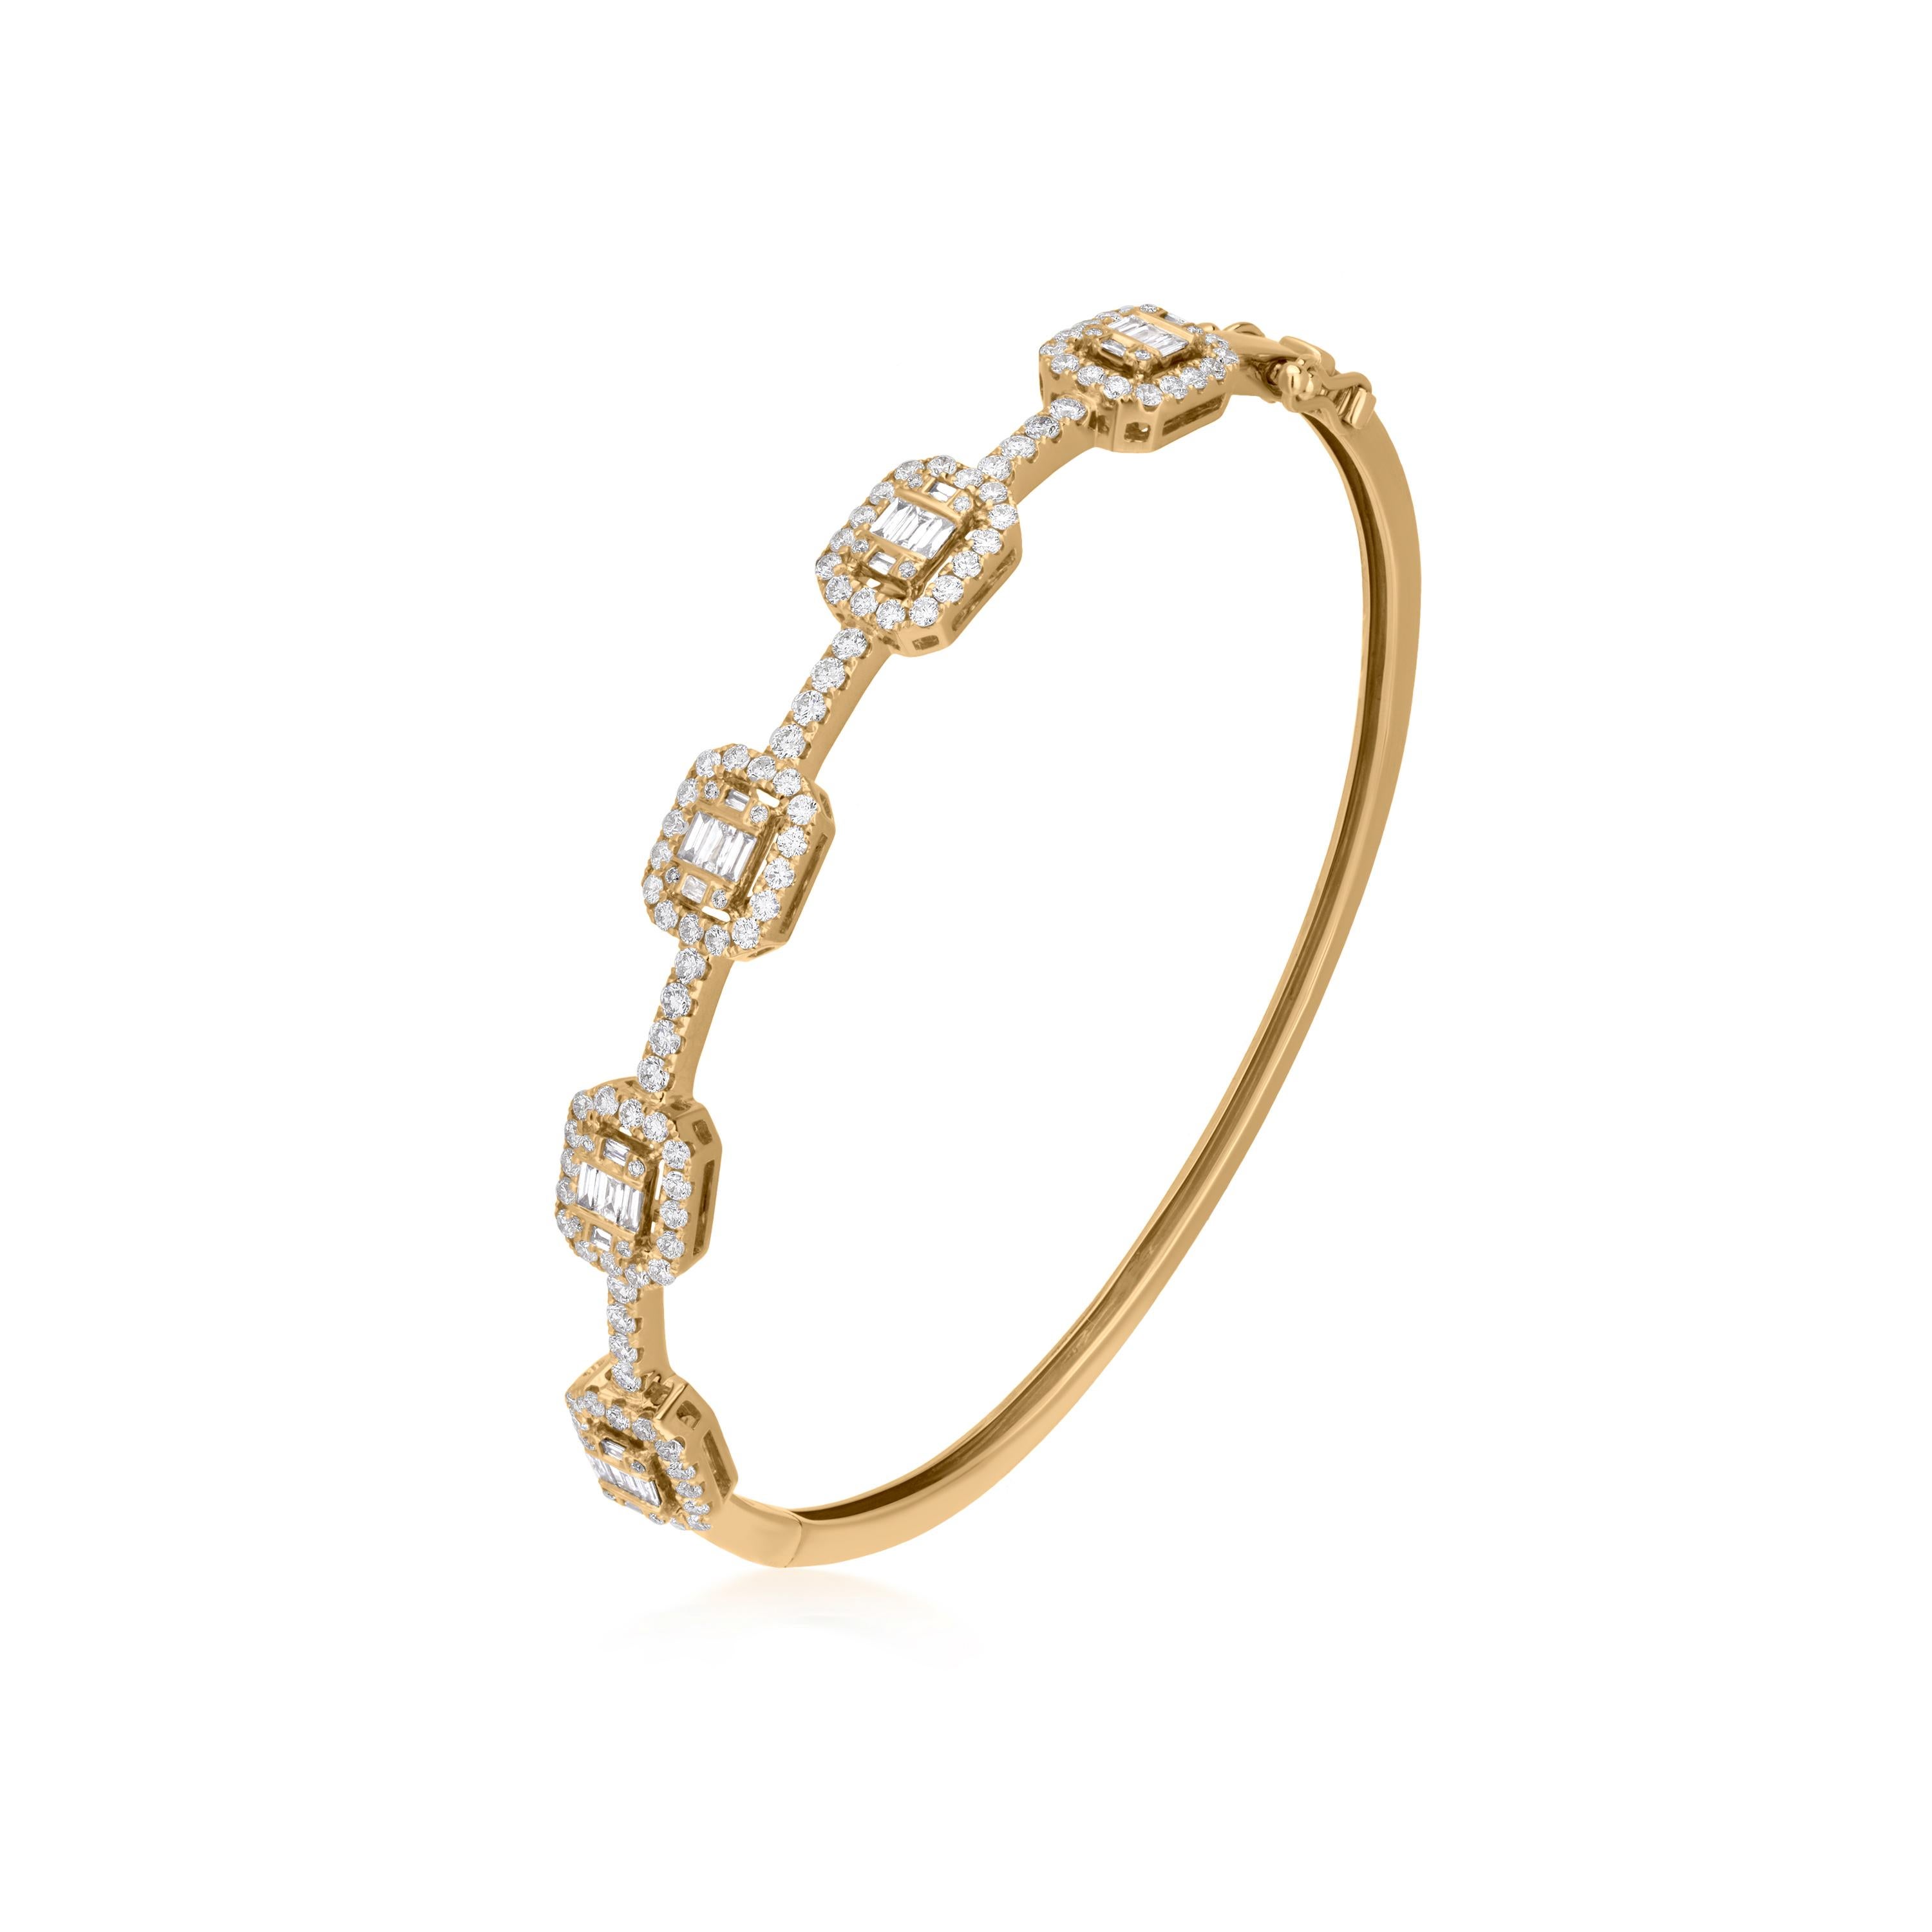 Adorn yourself with this spectacular diamond frames bangle bracelet of Luxle. Wrapping the front of the wrist in stately and sophisticated frames of 1.48 ct. t.w. baguette diamonds accentuated by a round diamond halo. The frames are mounted on